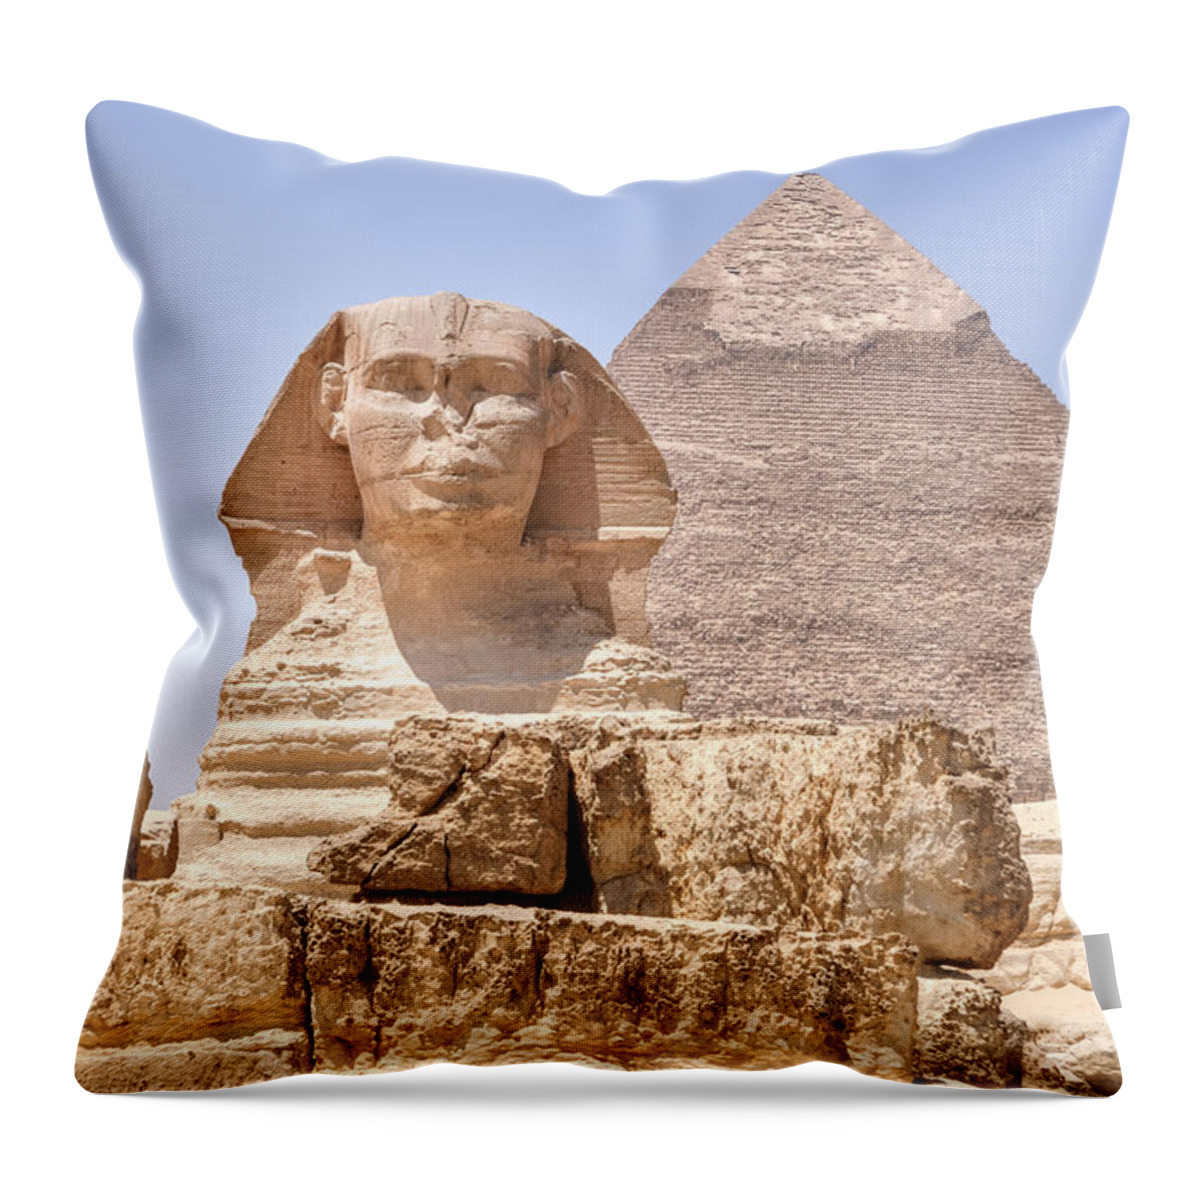 Great Sphinx Of Giza Throw Pillow featuring the photograph Great Sphinx of Giza - Egypt #3 by Joana Kruse